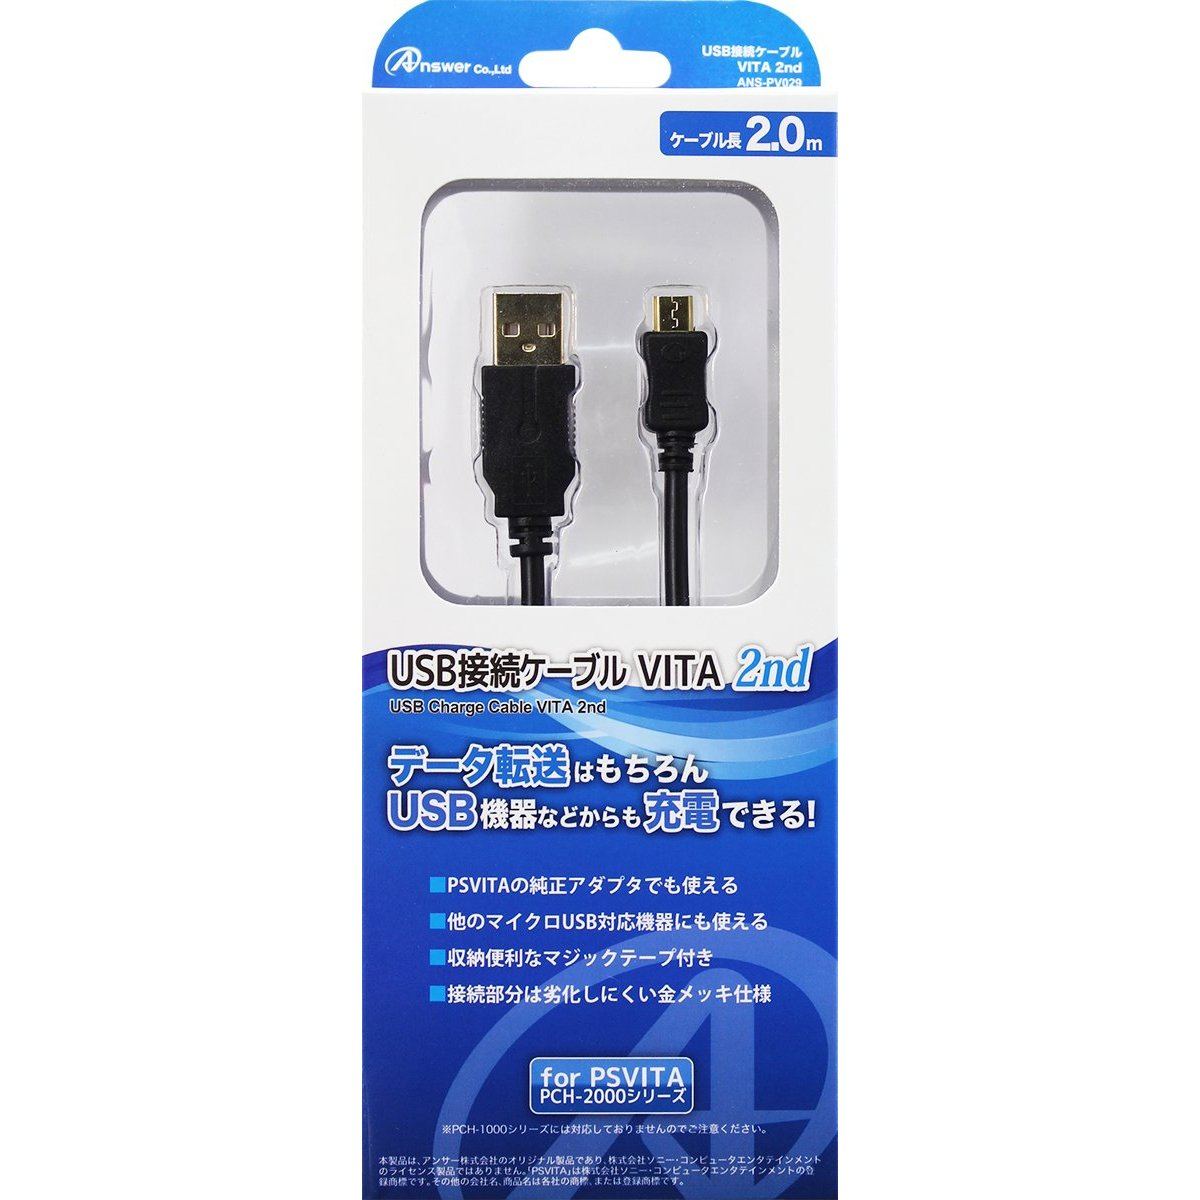 Usb Cable For Ps Vita Pch 00